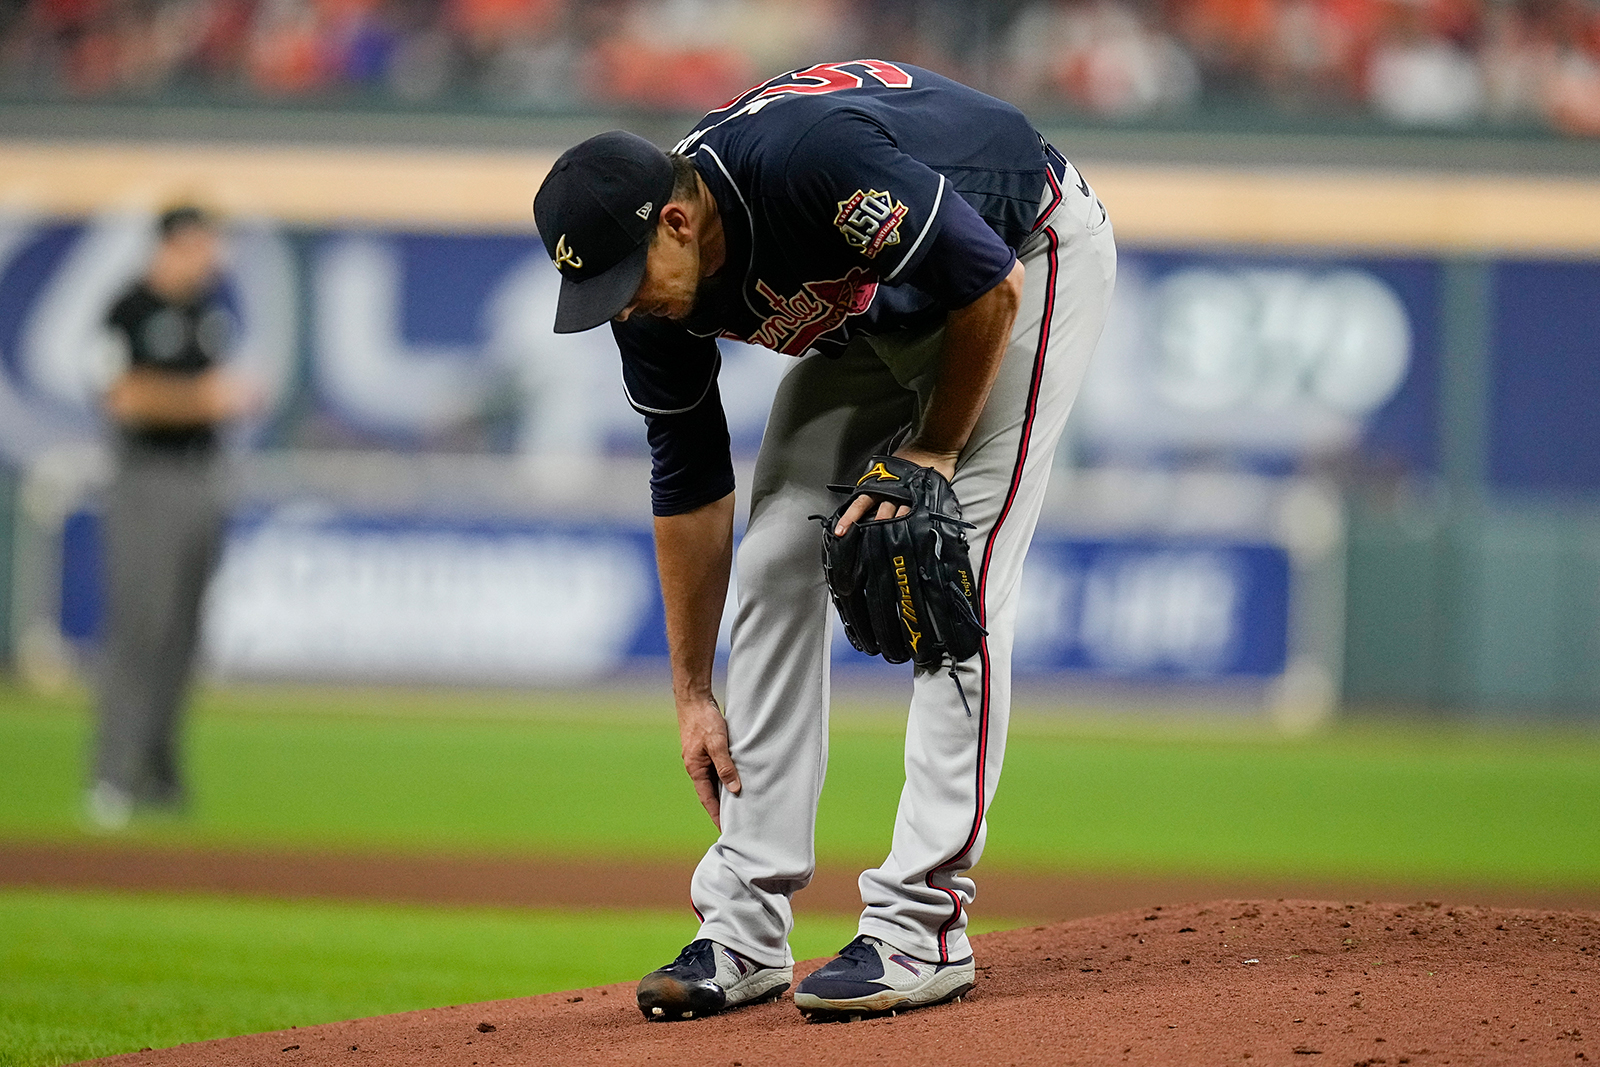 Atlanta Braves starting pitcher Charlie Morton rubs his leg before leaving the game during the third inning.